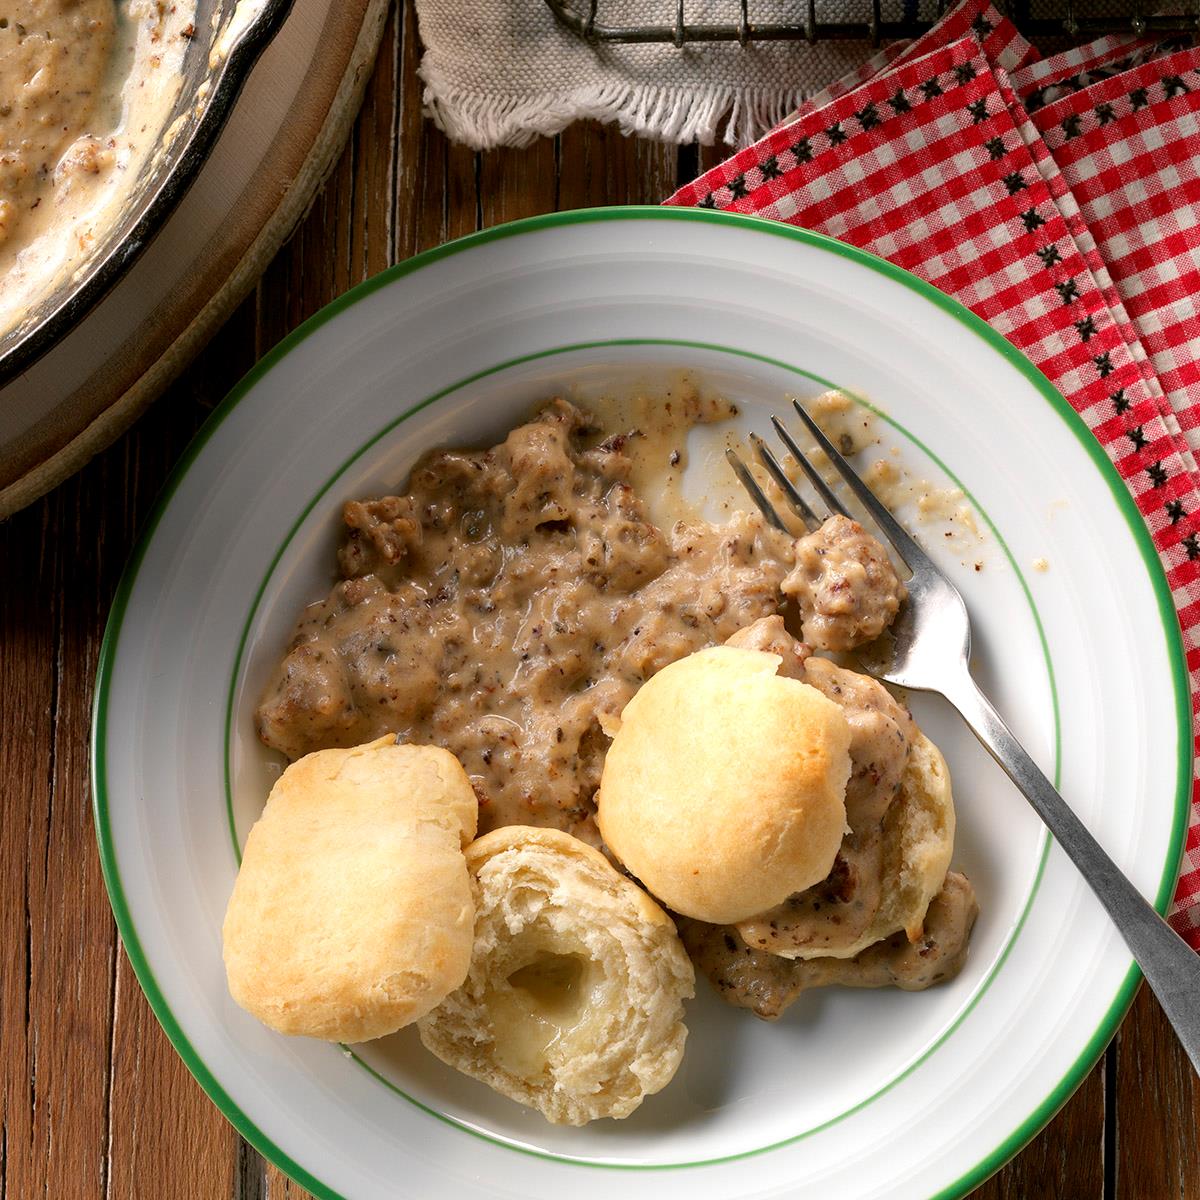 Herbed Sausage Gravy over Cheese Biscuits